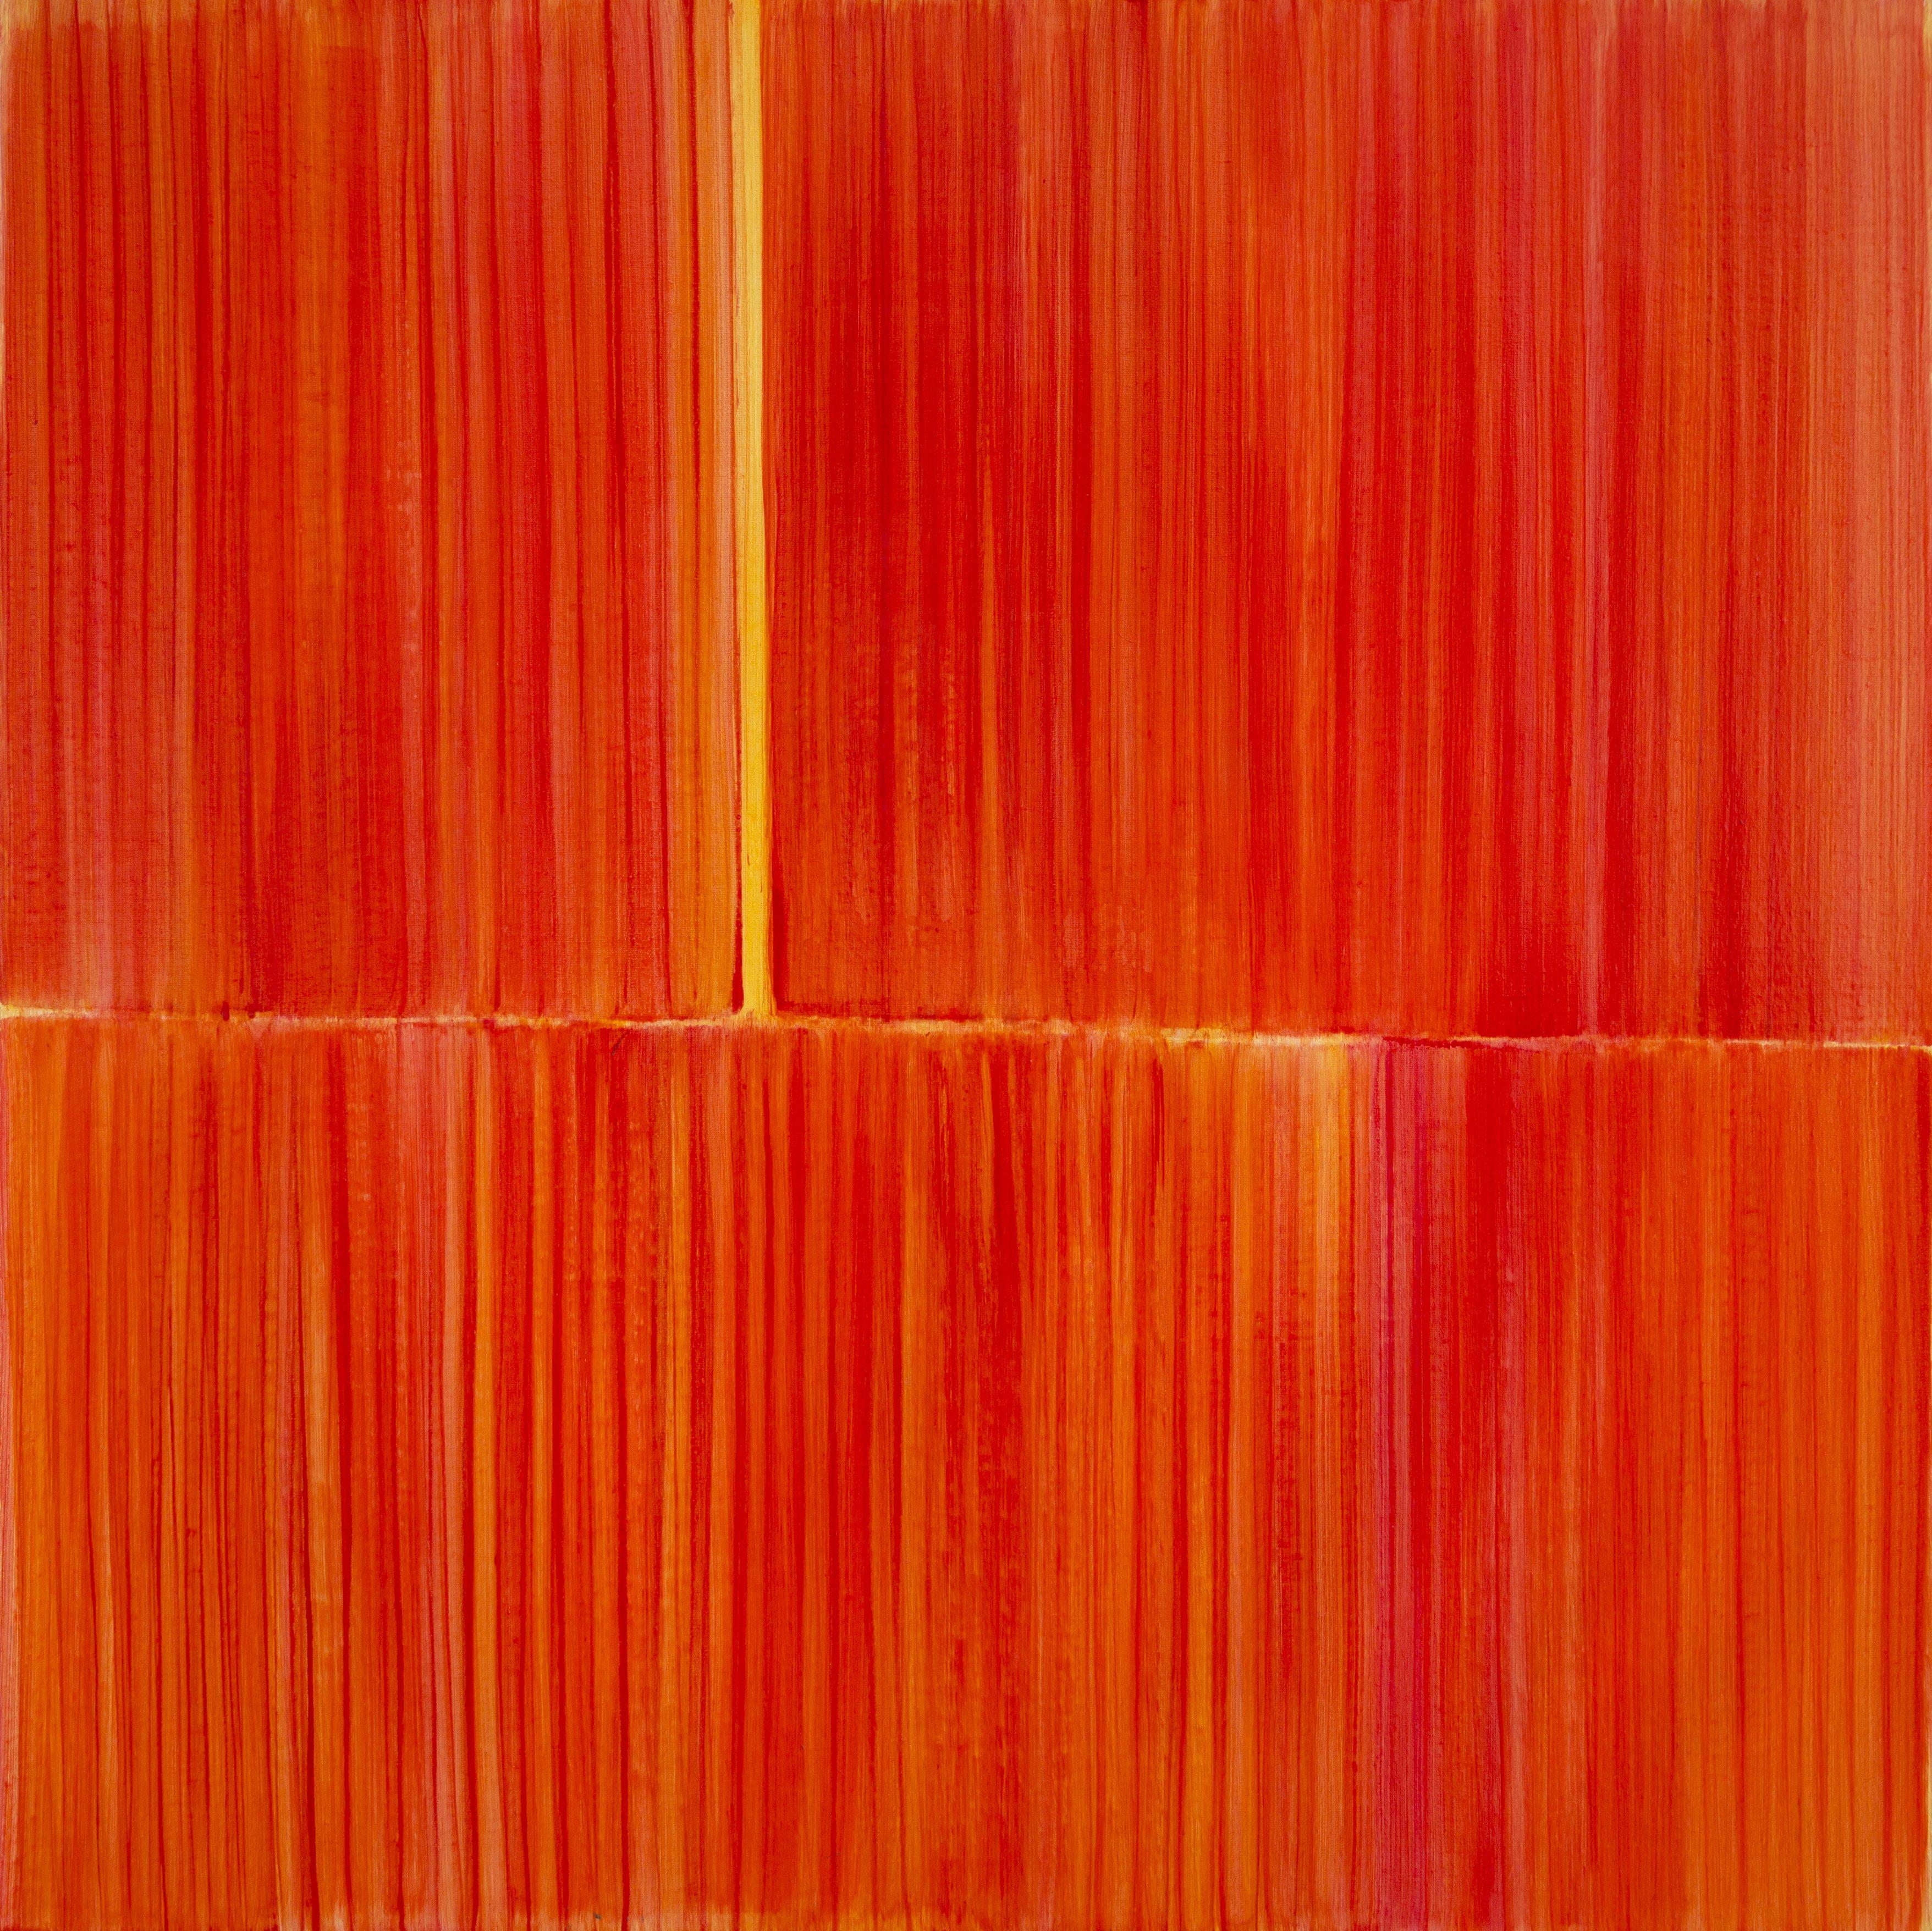 Acrylic ink on linen. Inspired on Mark Rothko's floating shapes. Her elaborate and often repetitive patterns create moments of tension and release as they lead the viewer across the canvas. Cintia Garc├¡a allows elements of chance to dictate the